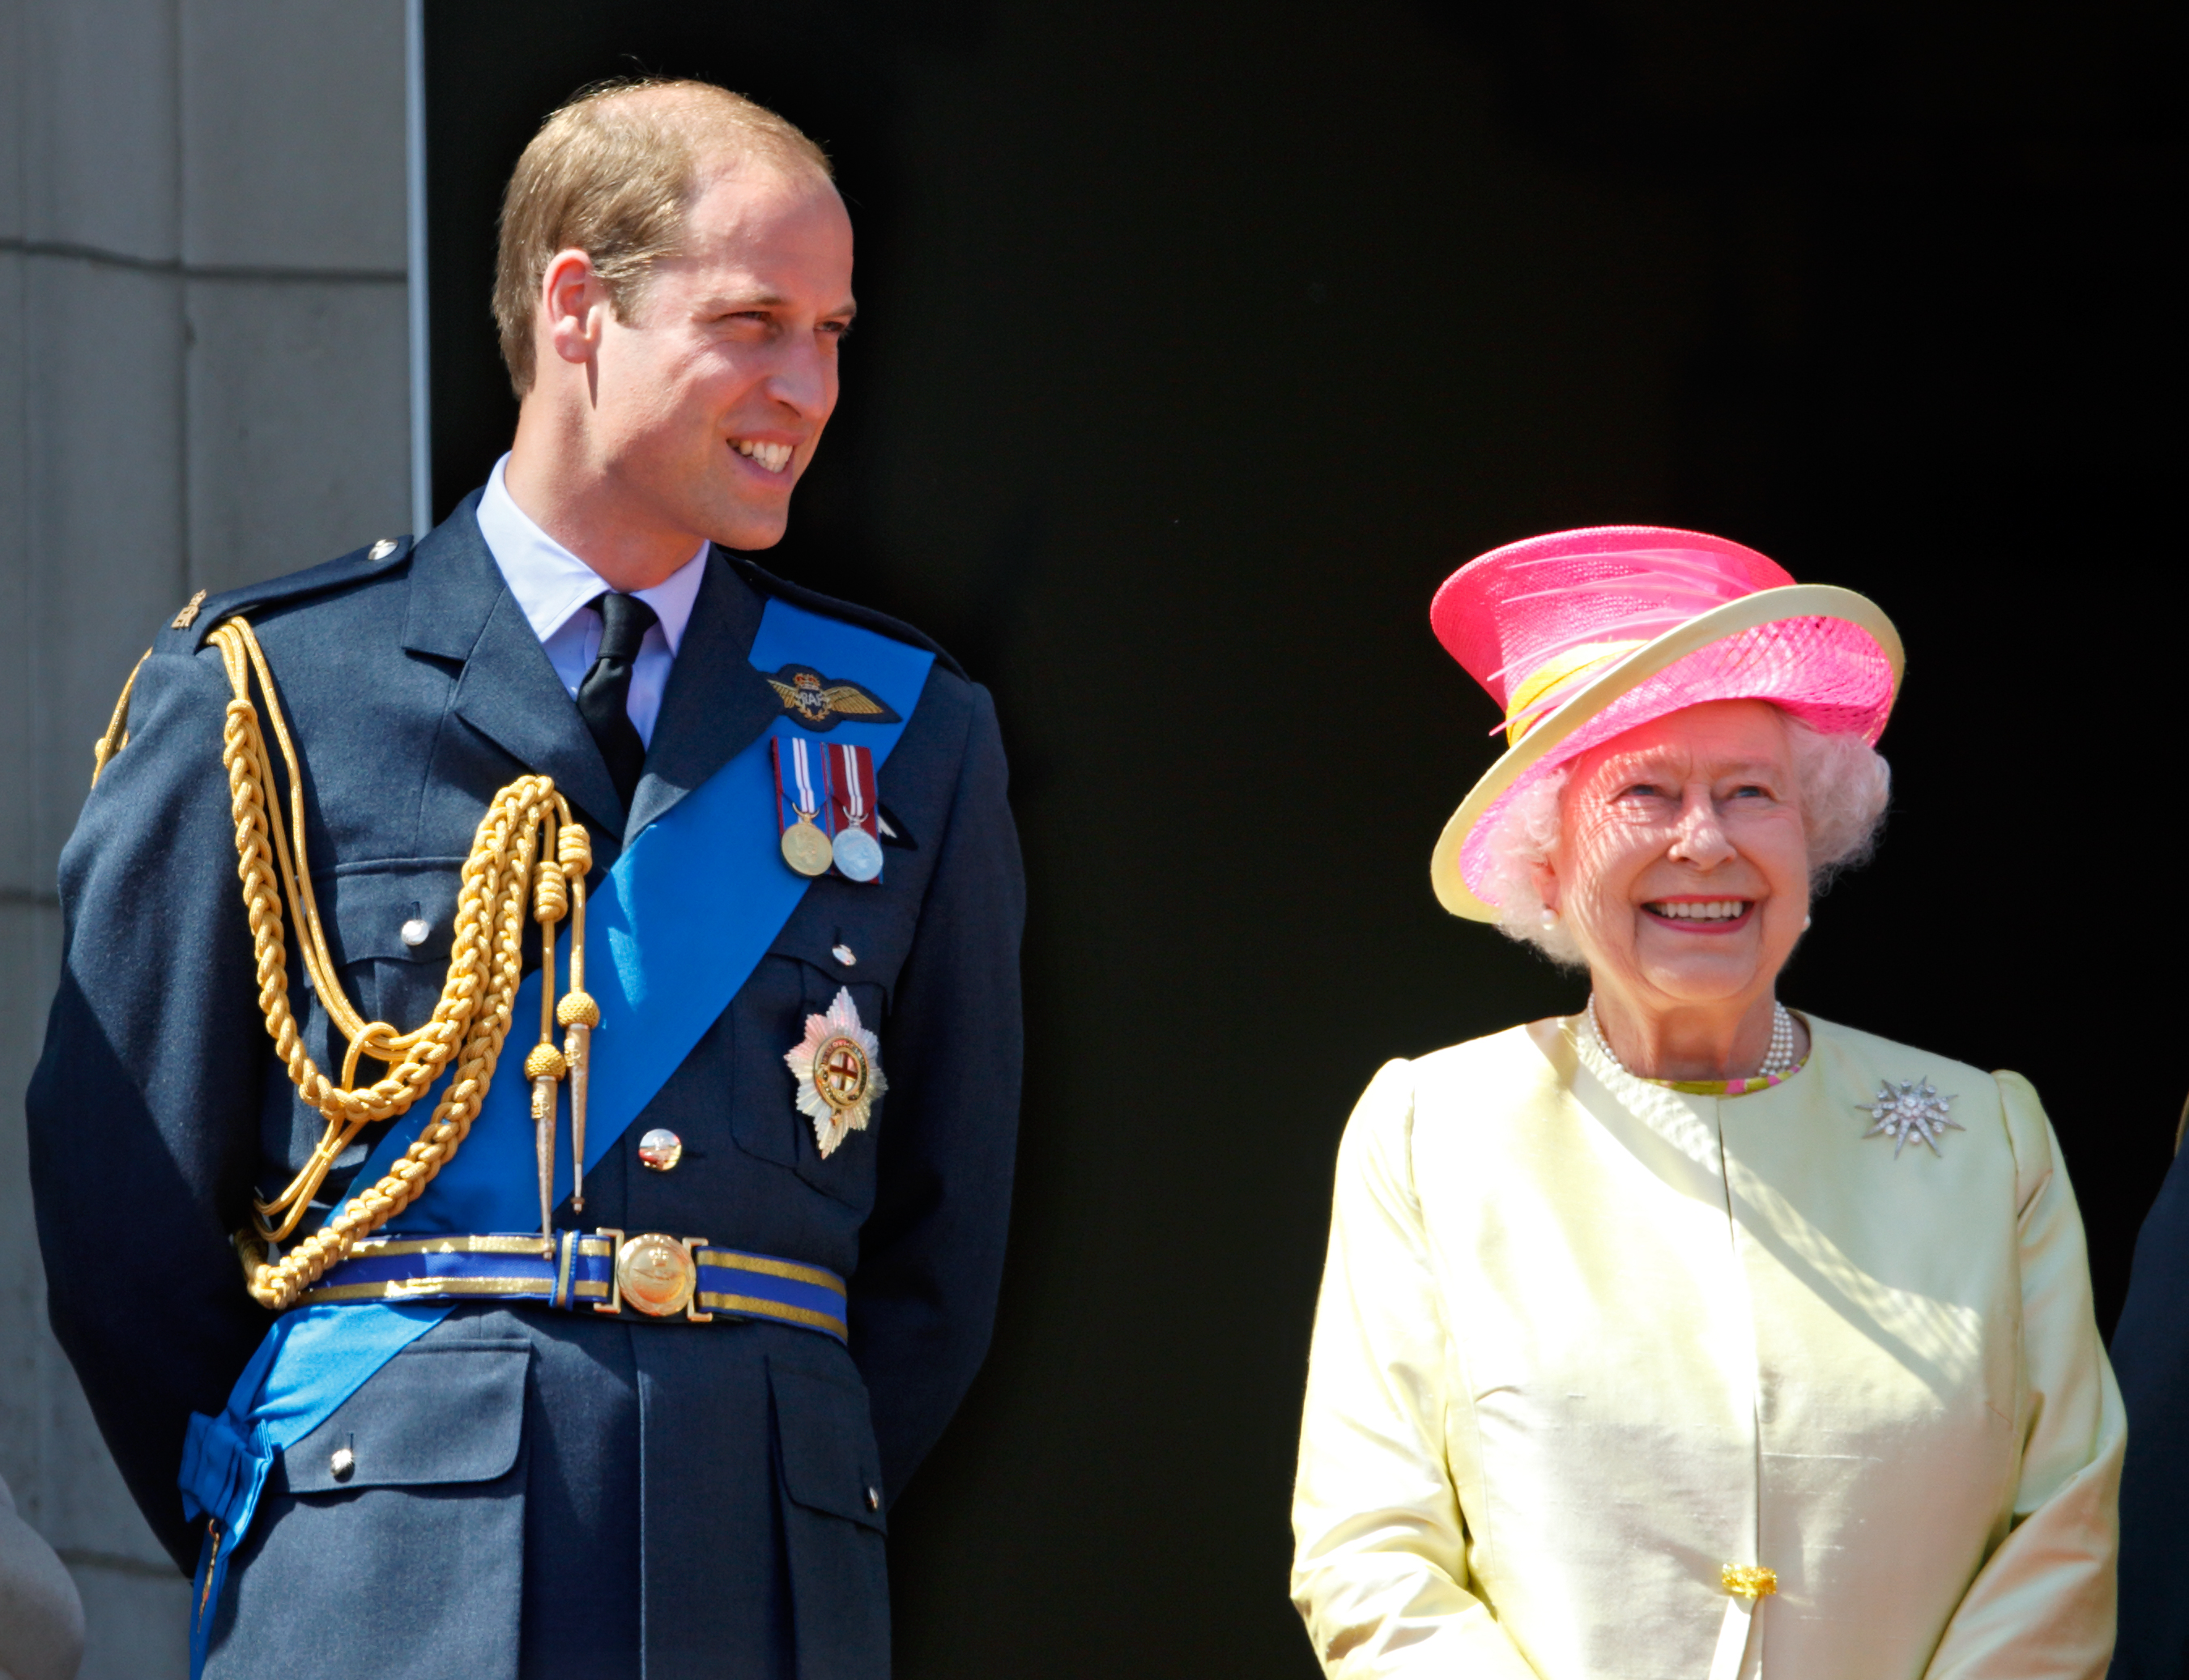 Prince William, Duke of Cambridge and Queen Elizabeth II watch a flypast of Spitfire &amp; Hurricane aircraft from the balcony of Buckingham Palace to commemorate the 75th Anniversary of The Battle of Britain on July 10, 2015 in London, England. (Max Mumby/Indigo&mdash;Getty Images)